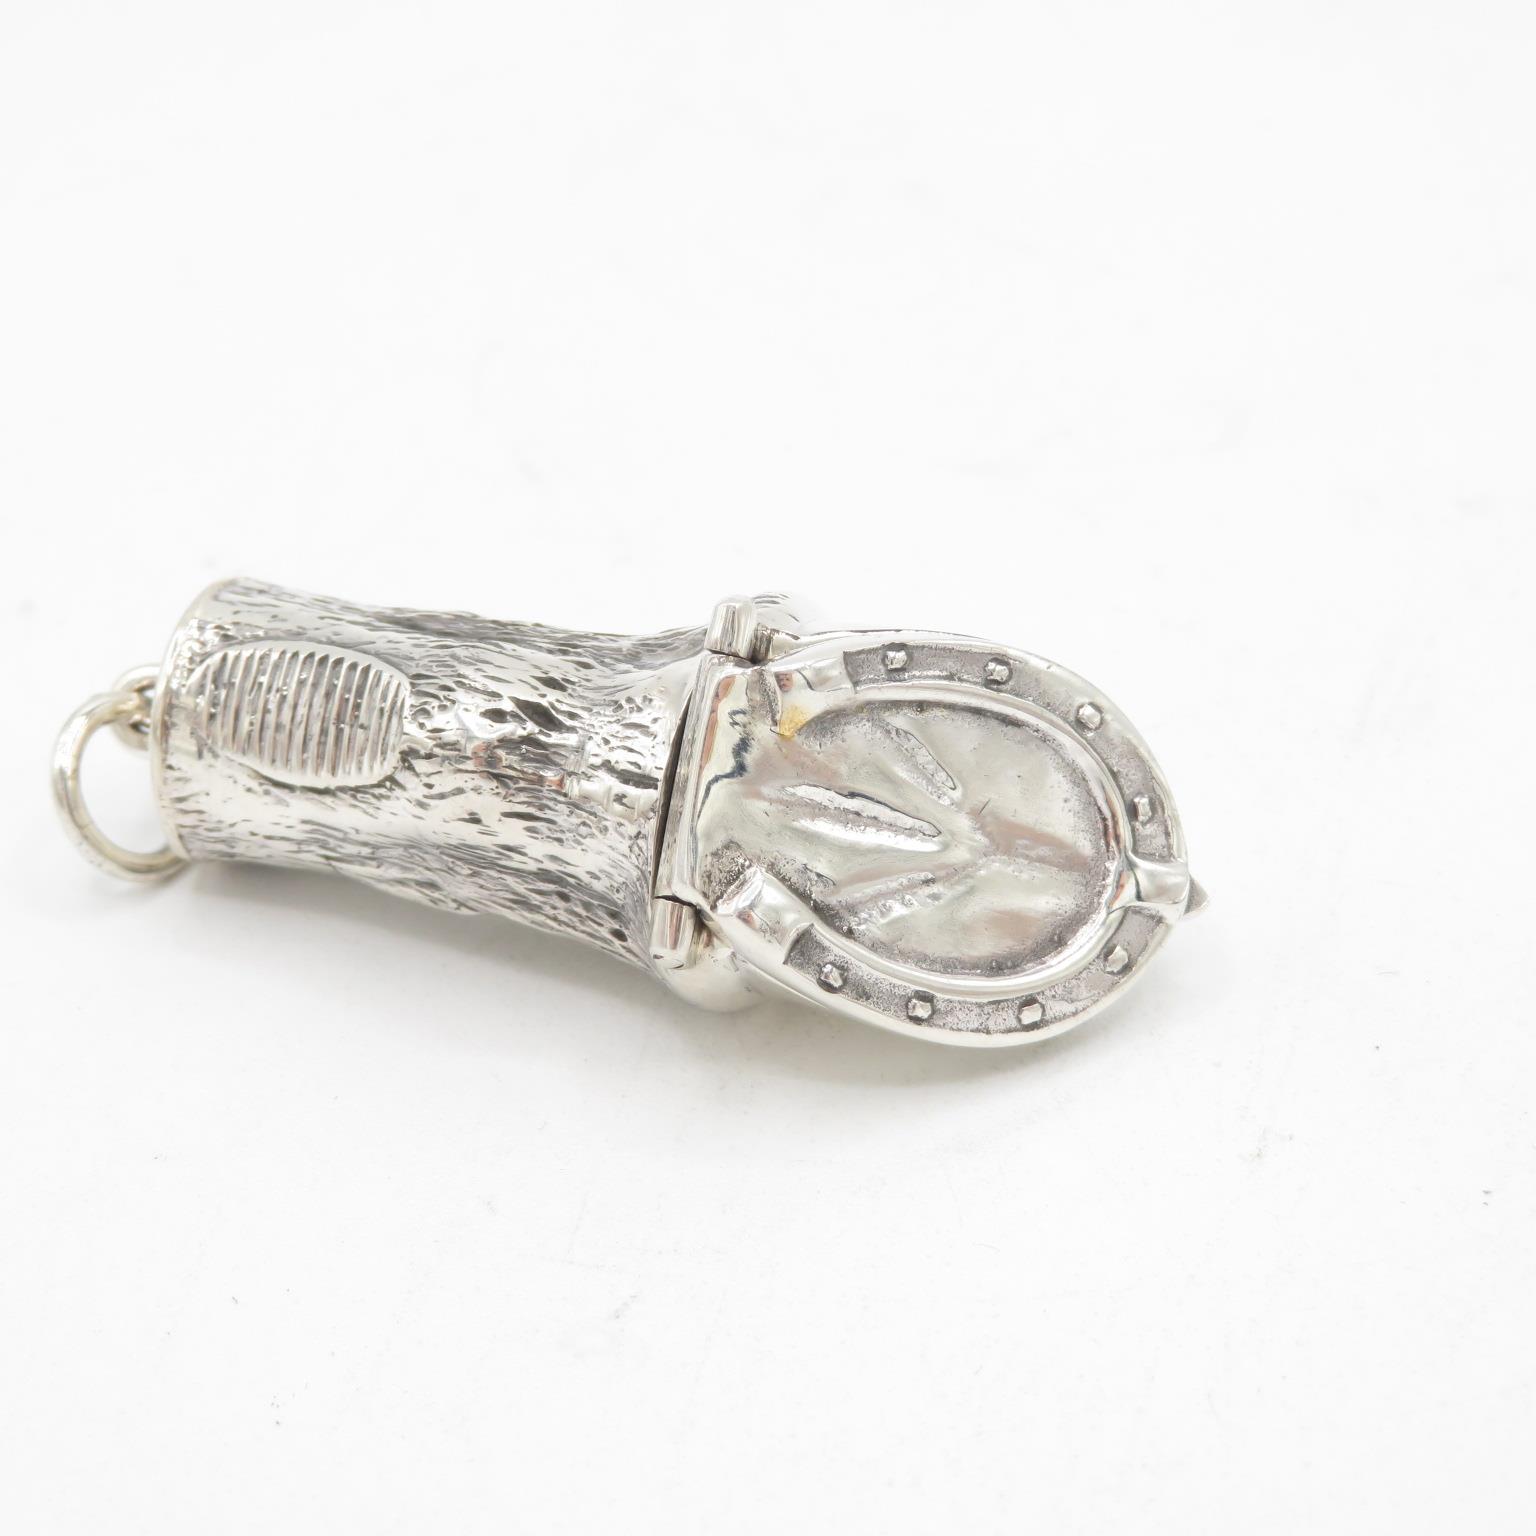 Horse's leg and hoof HM 925 Sterling Silver Vesta in excellent condition with tight closing hinged - Image 3 of 5